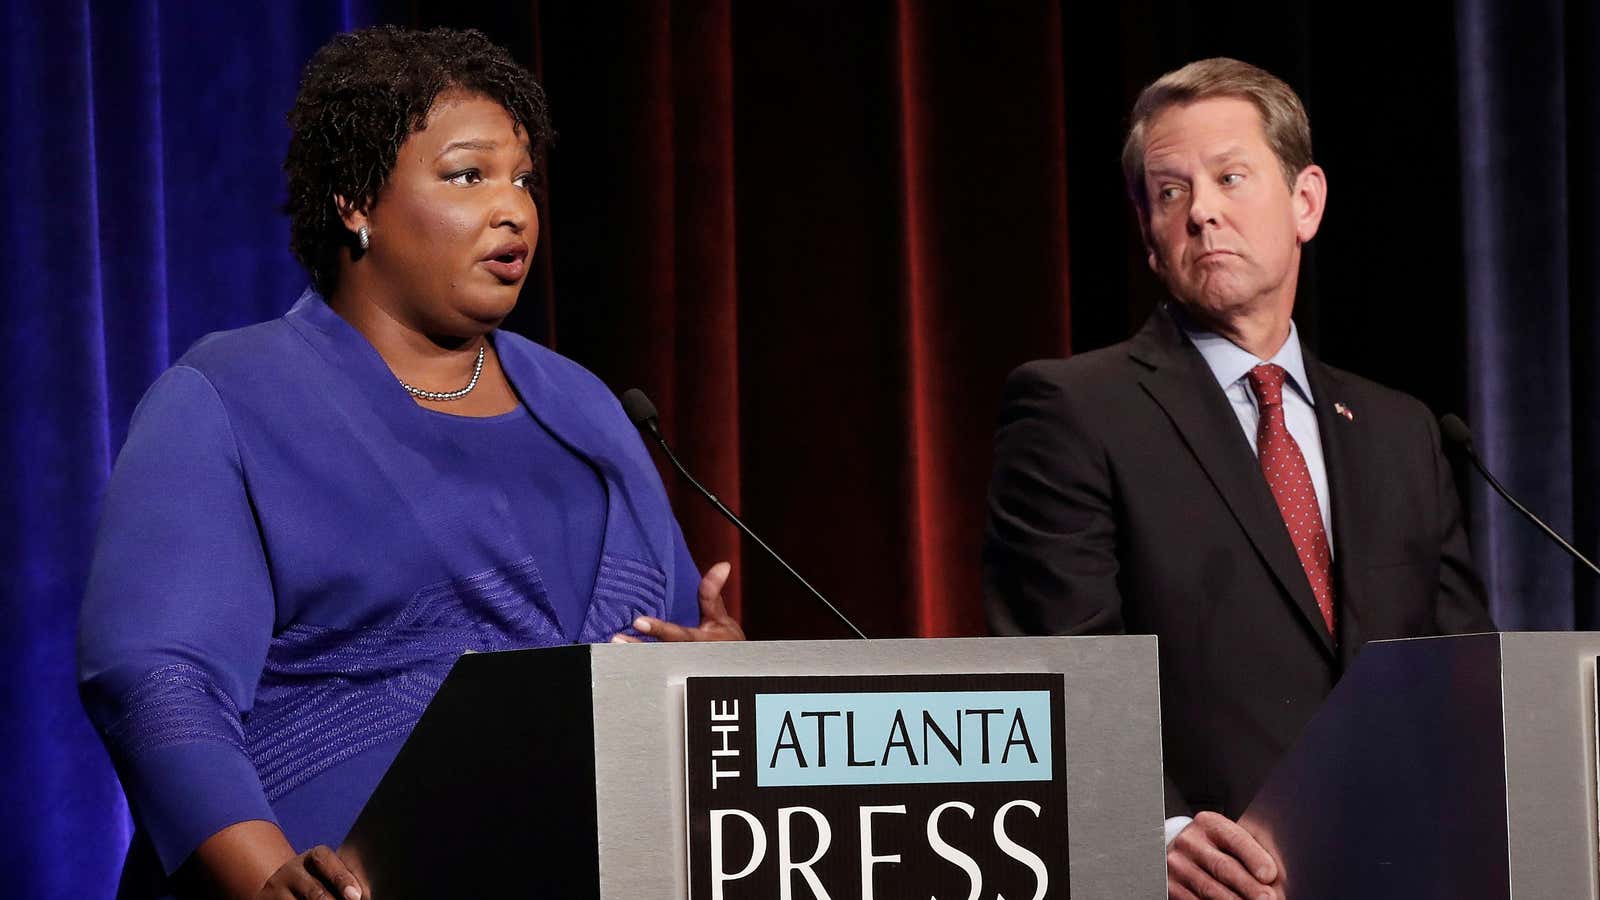 Democratic gubernatorial candidate for Georgia Stacey Abrams, right, and her GOP rival, Brian Kemp, ahead of the election.